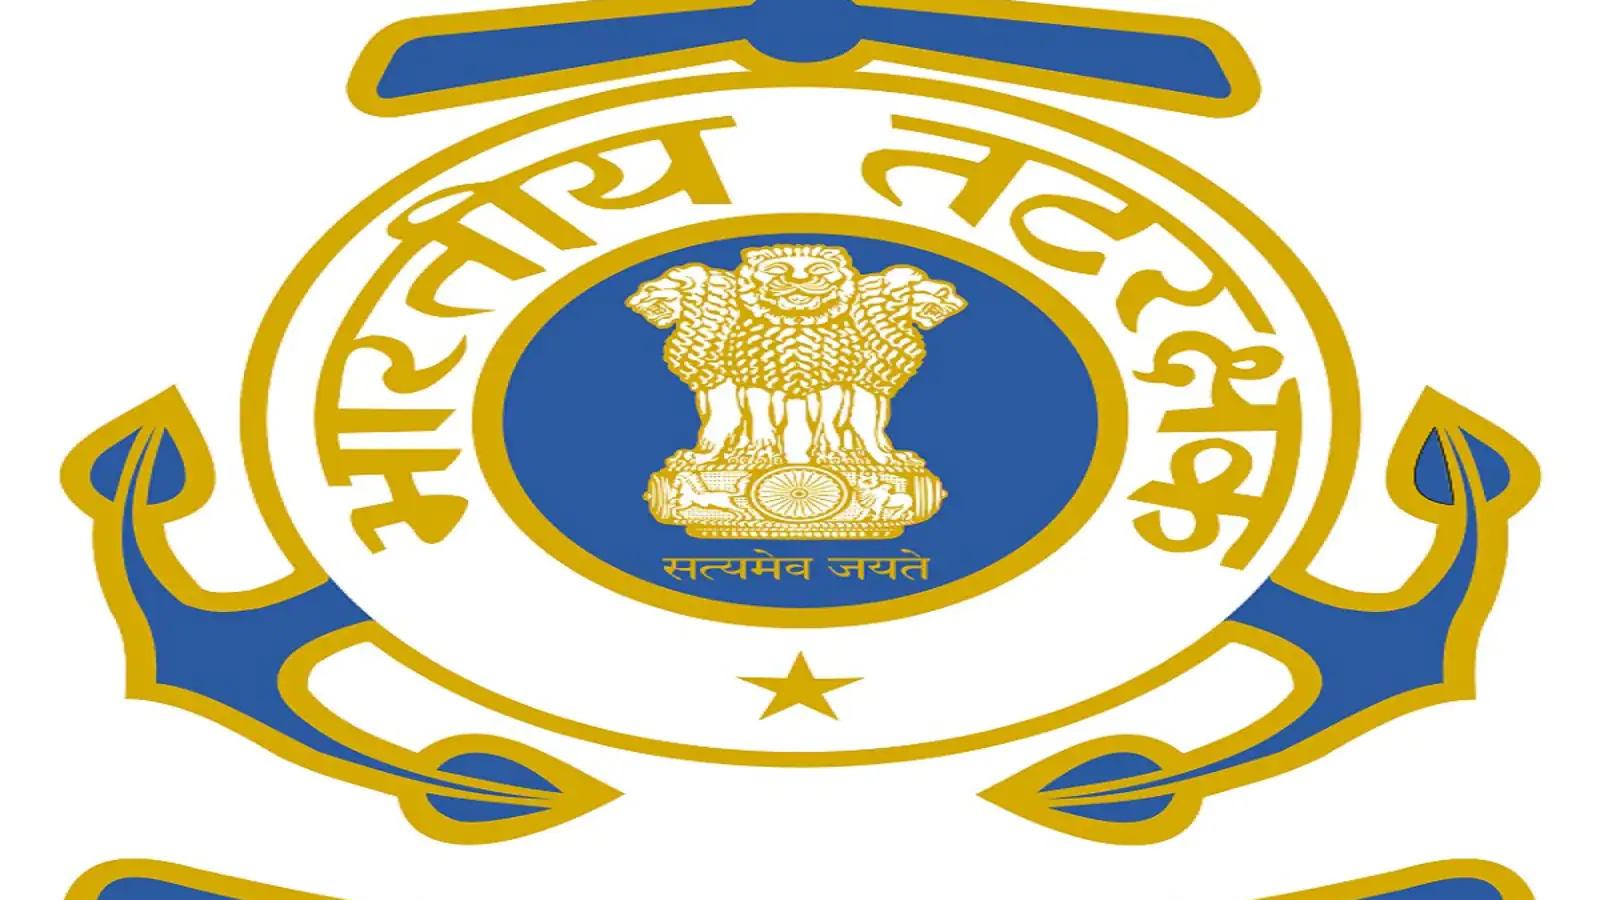 Indian Coast Guard to recruit 71 Asst Commandant posts, registration from Aug 17